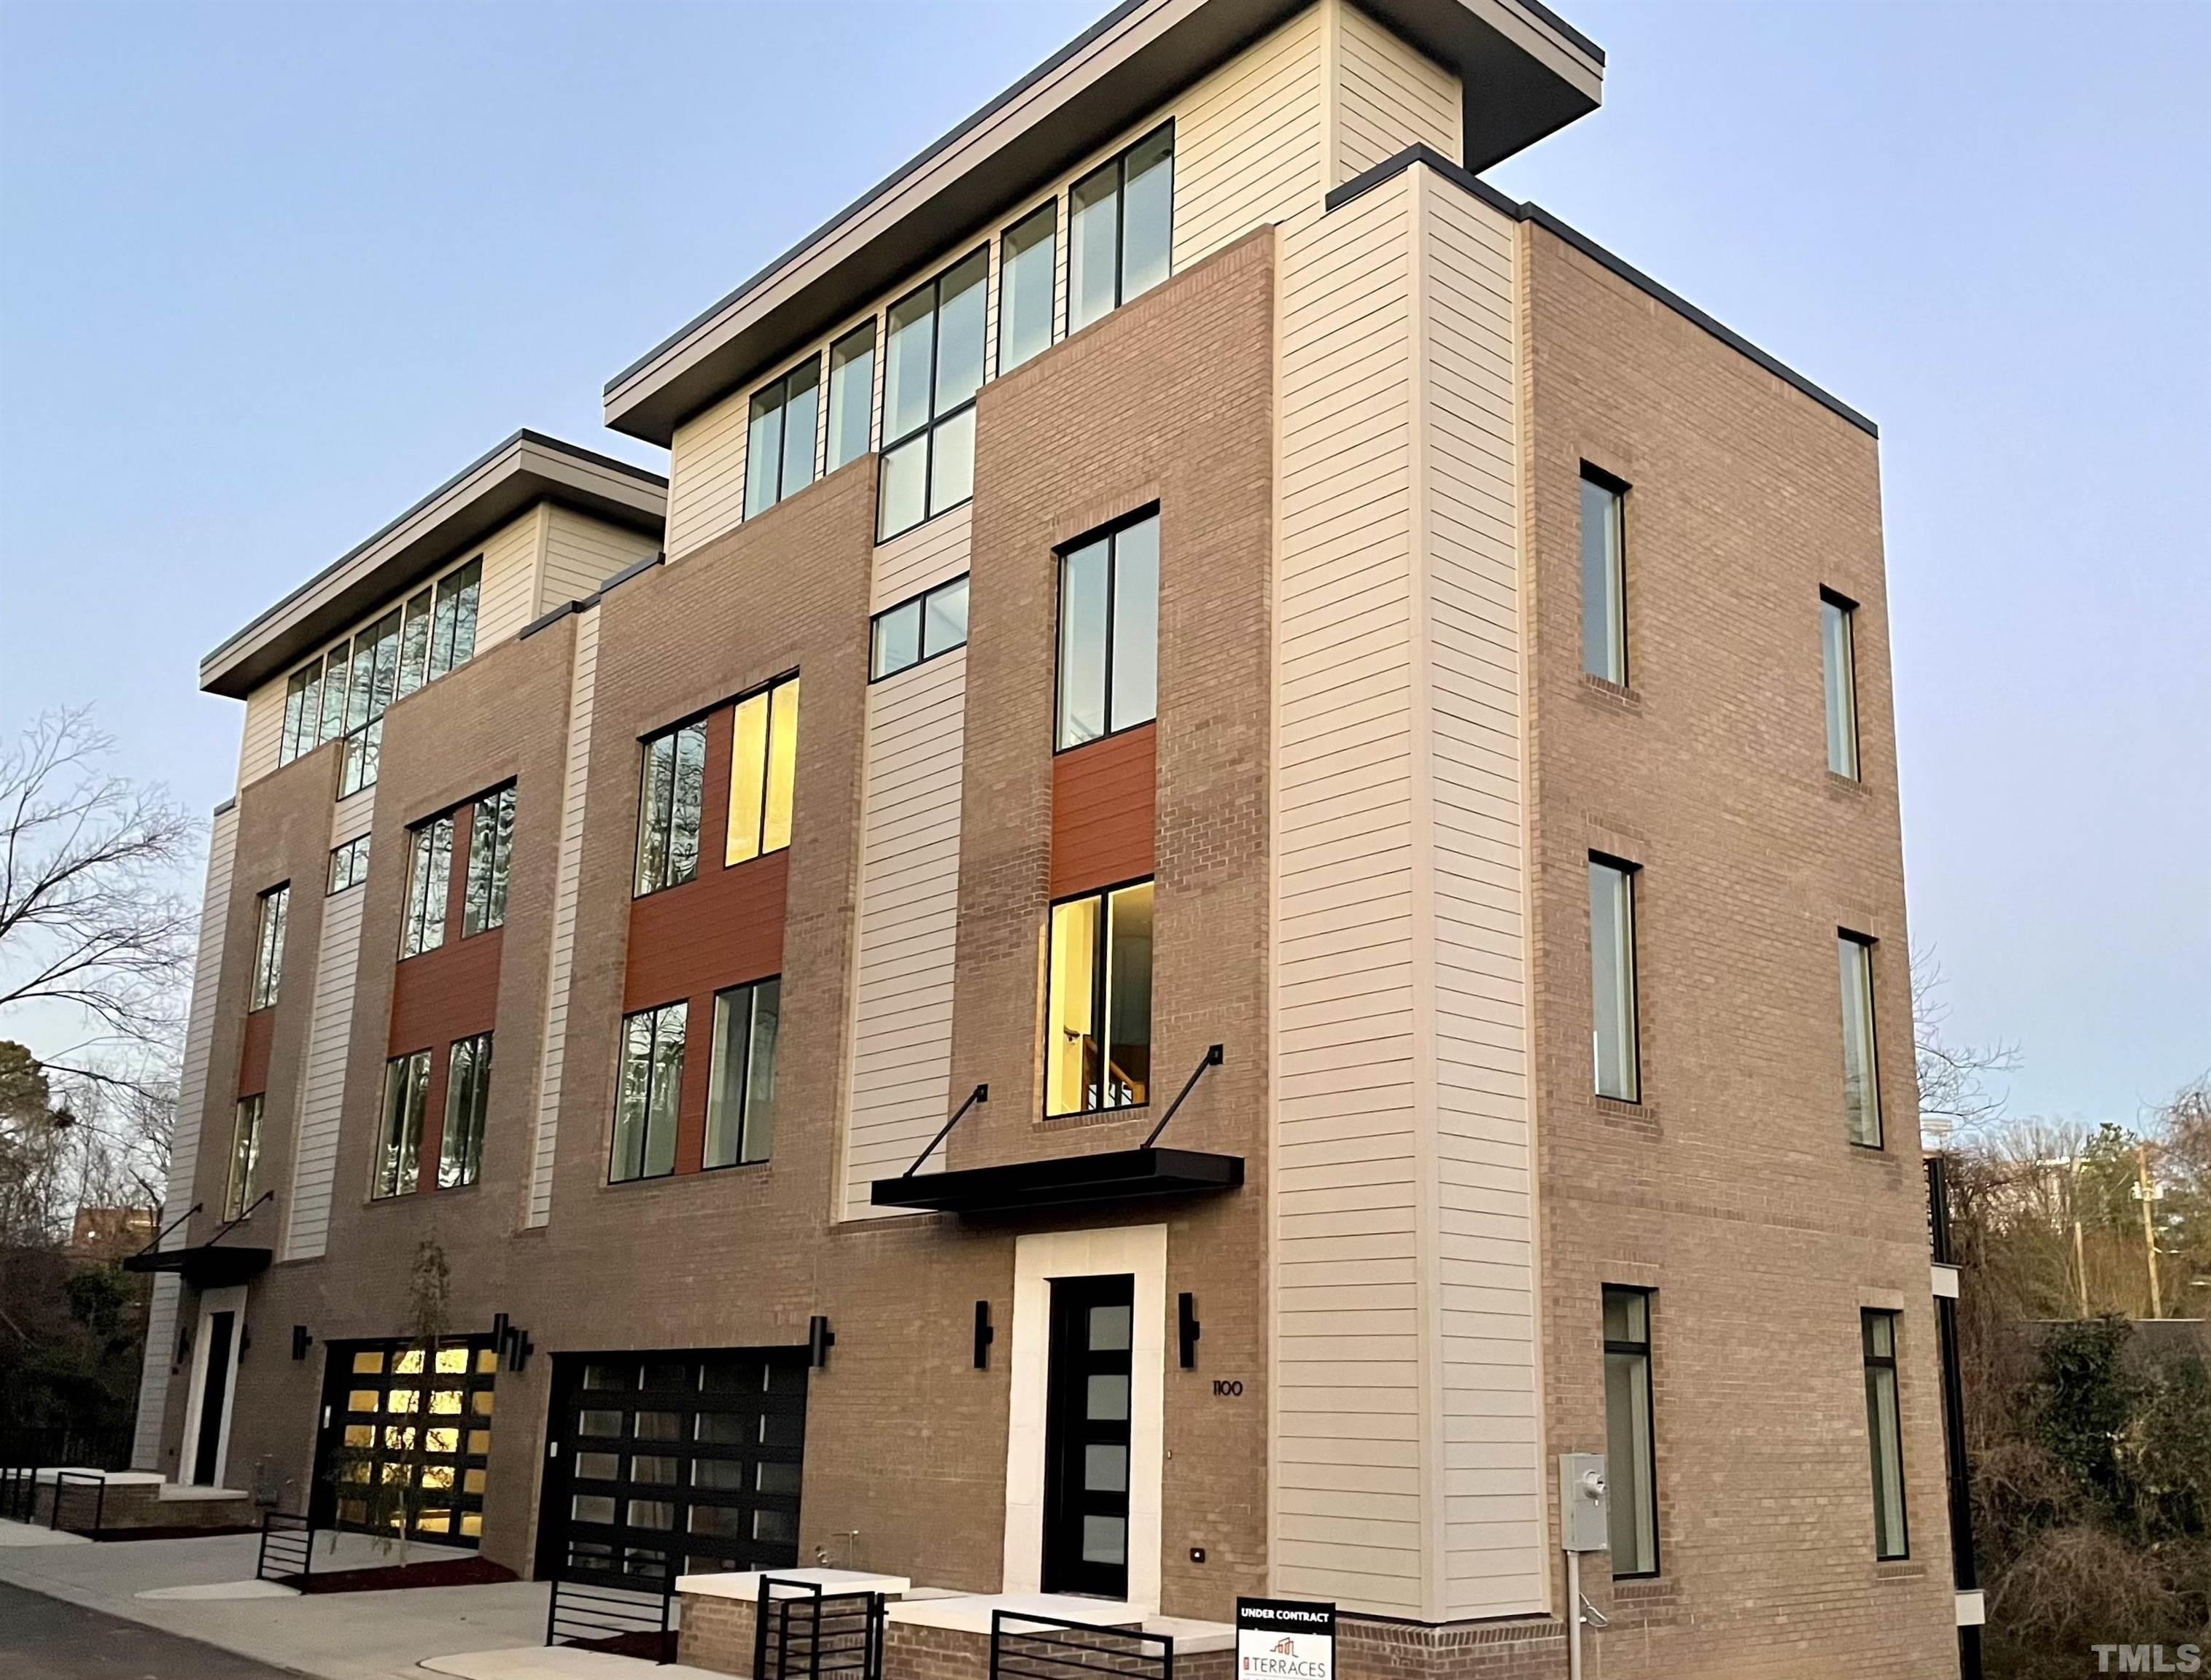 This photo shows the two completed Veranda units Phase 1, and expect a near carbon copy for Phase 2. Front elevation is on Manor Way with rooftop facing Downtown Durham and American Tobacco Trails.